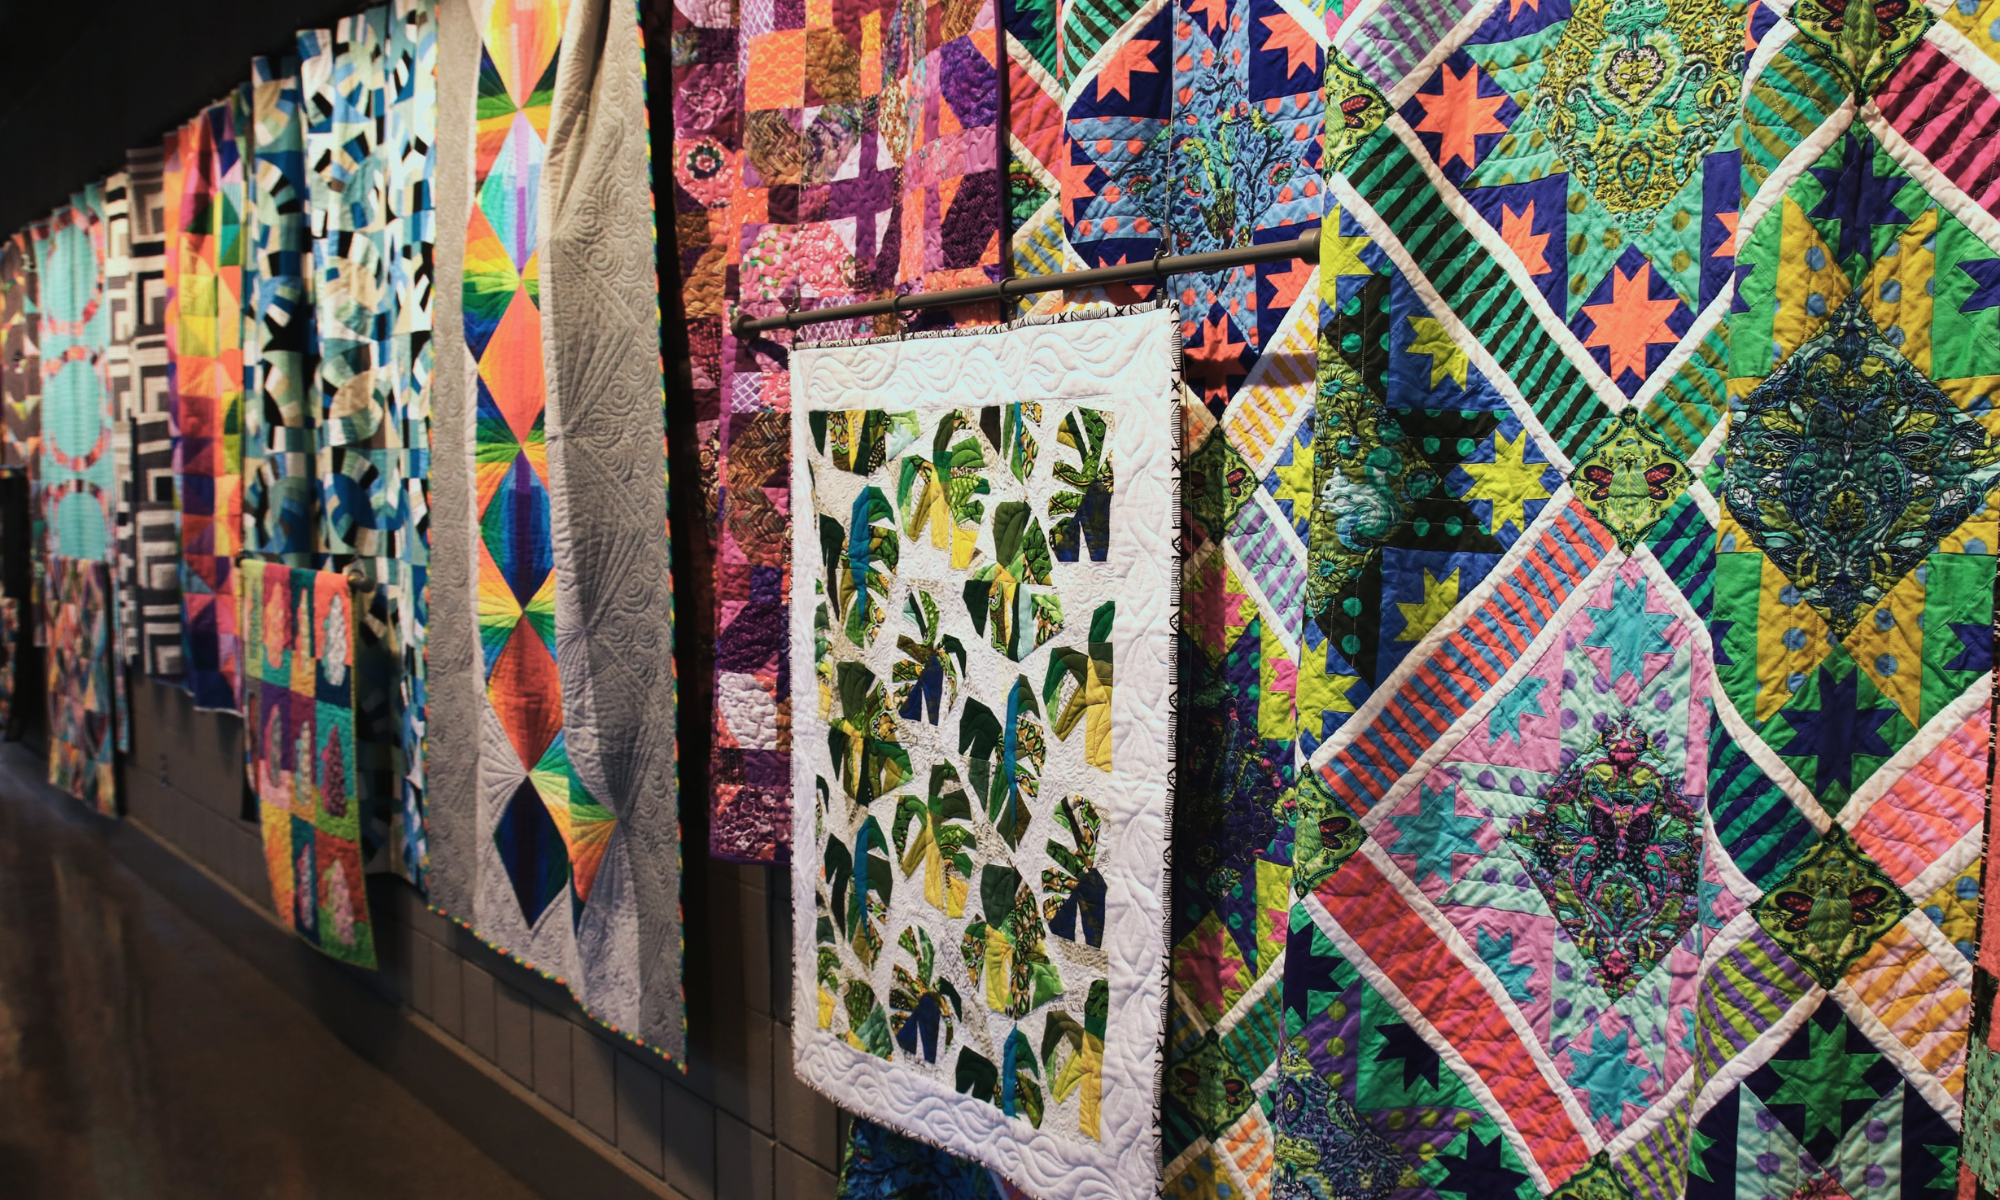 quilts hung on an art gallery wall